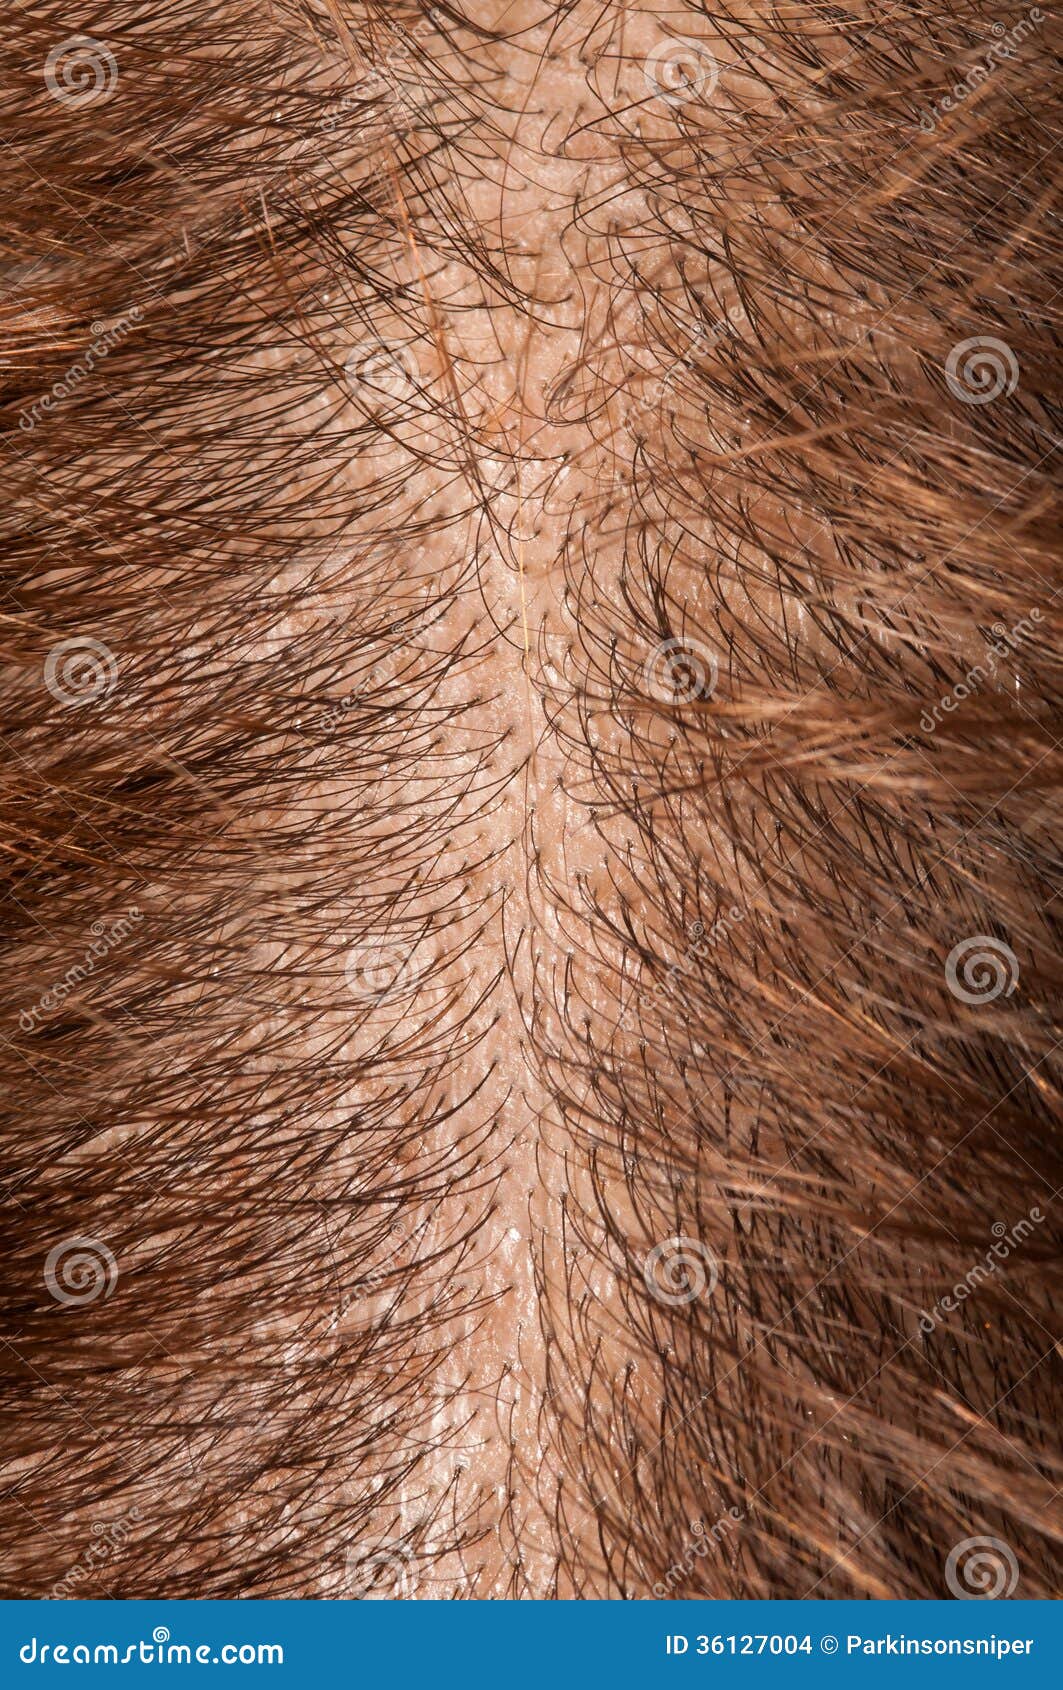 cunt pics hairy Young